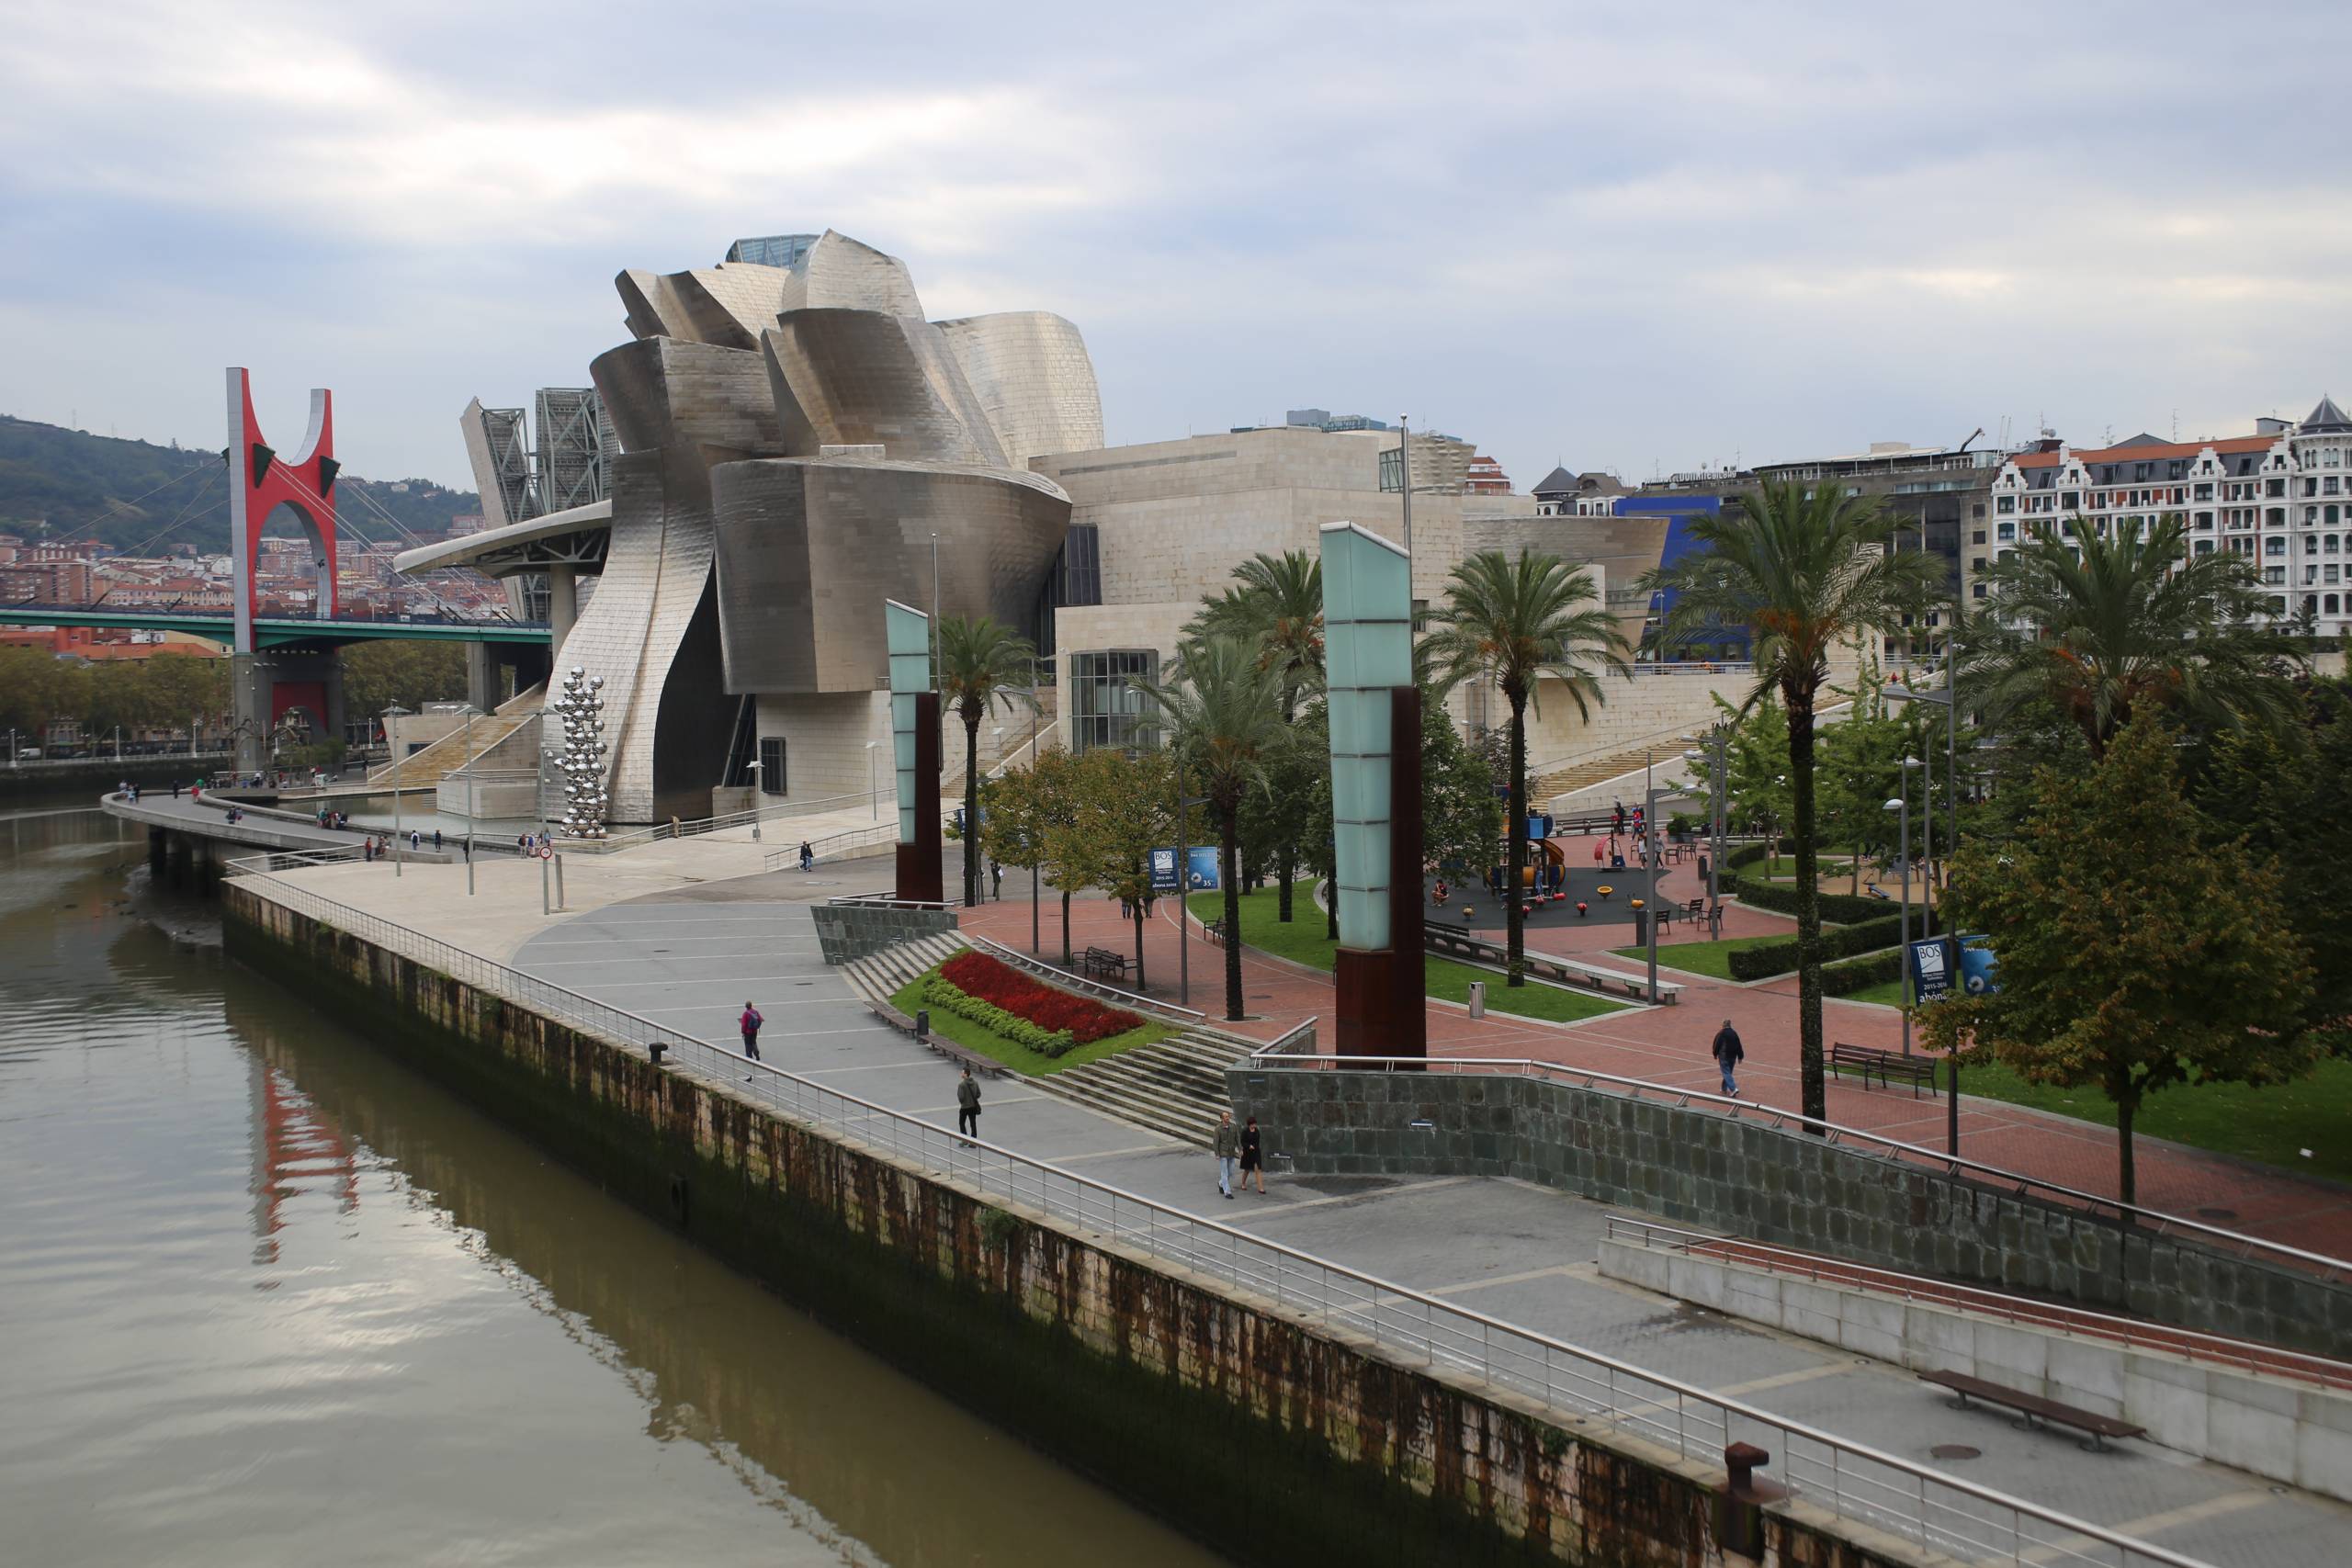 The Guggenheim Bilbao is a testament to the power of architecture, art, and culture to transform a city